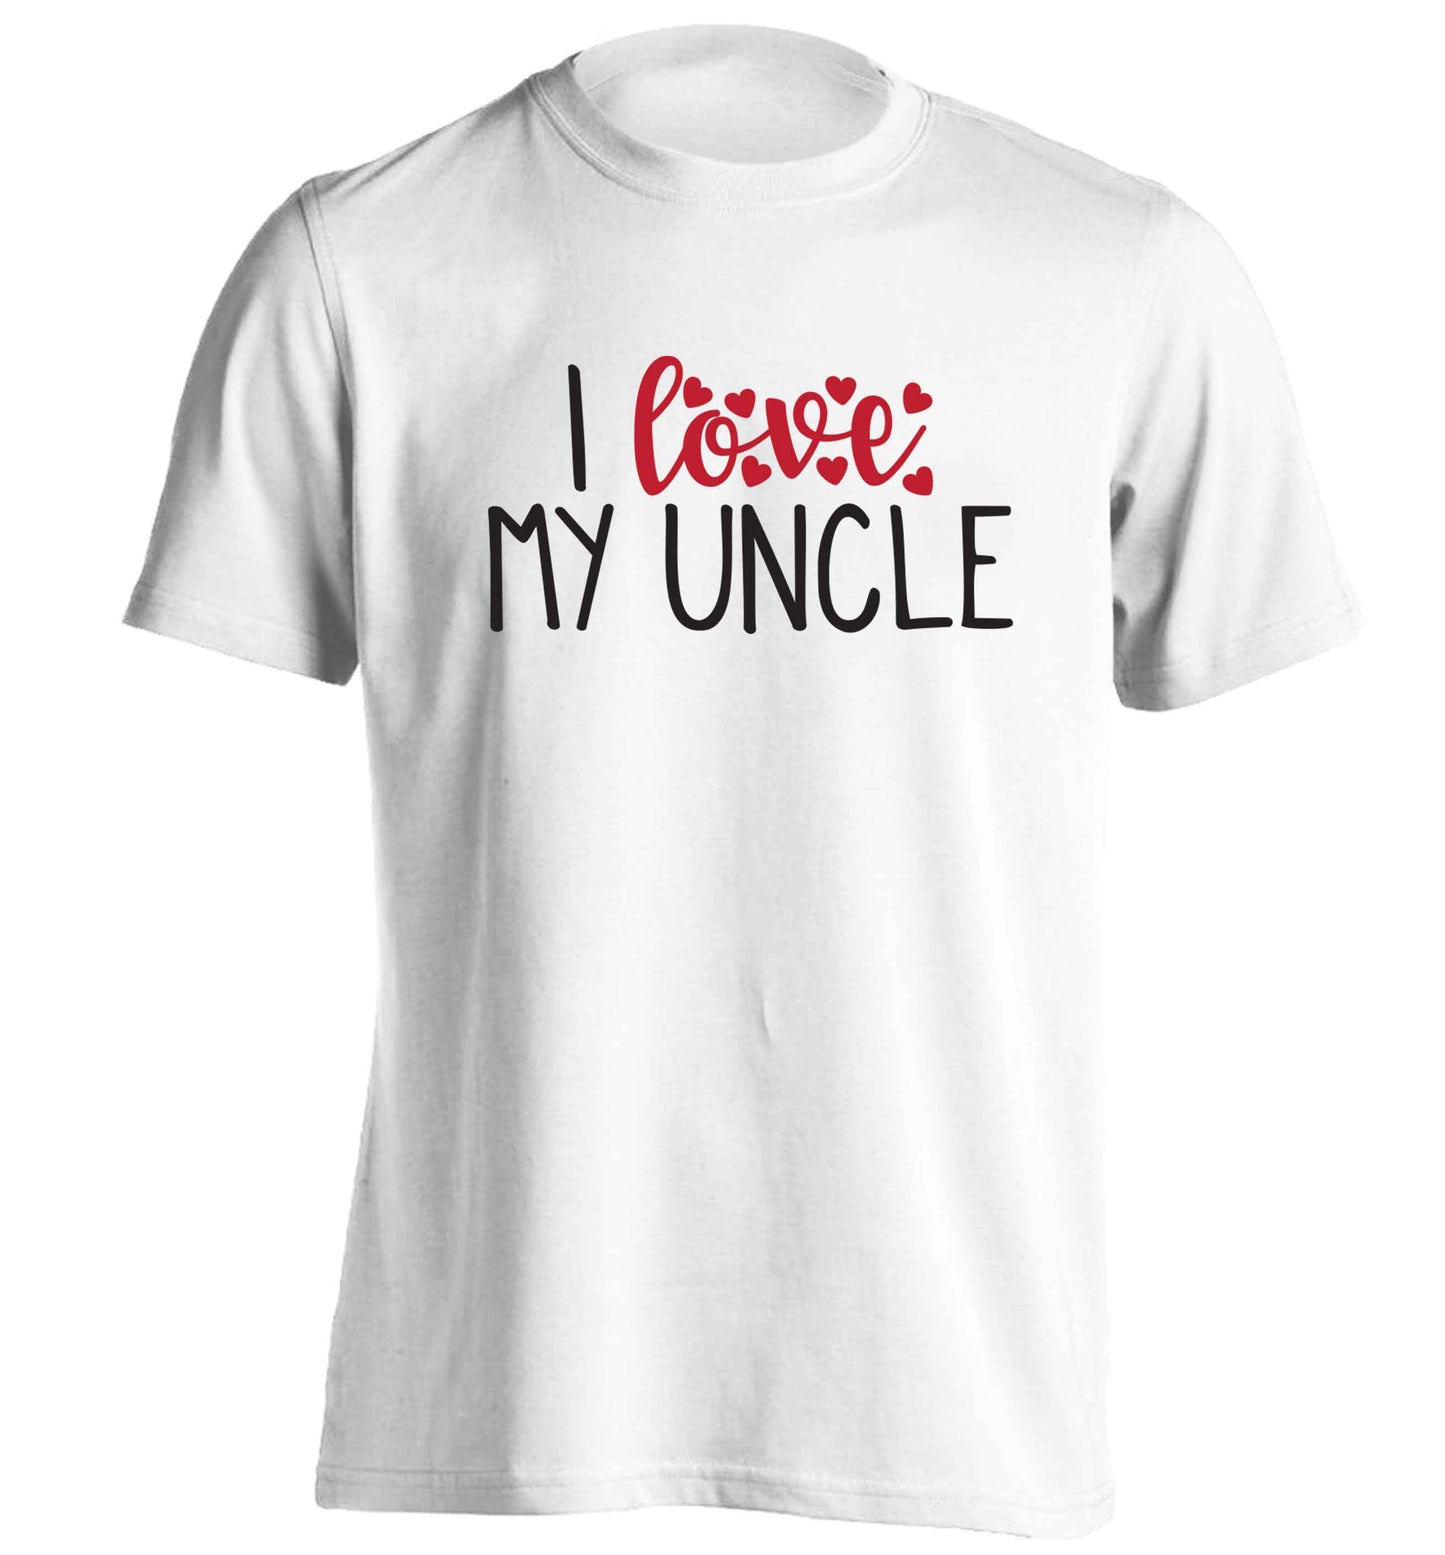 I love my uncle adults unisex white Tshirt 2XL